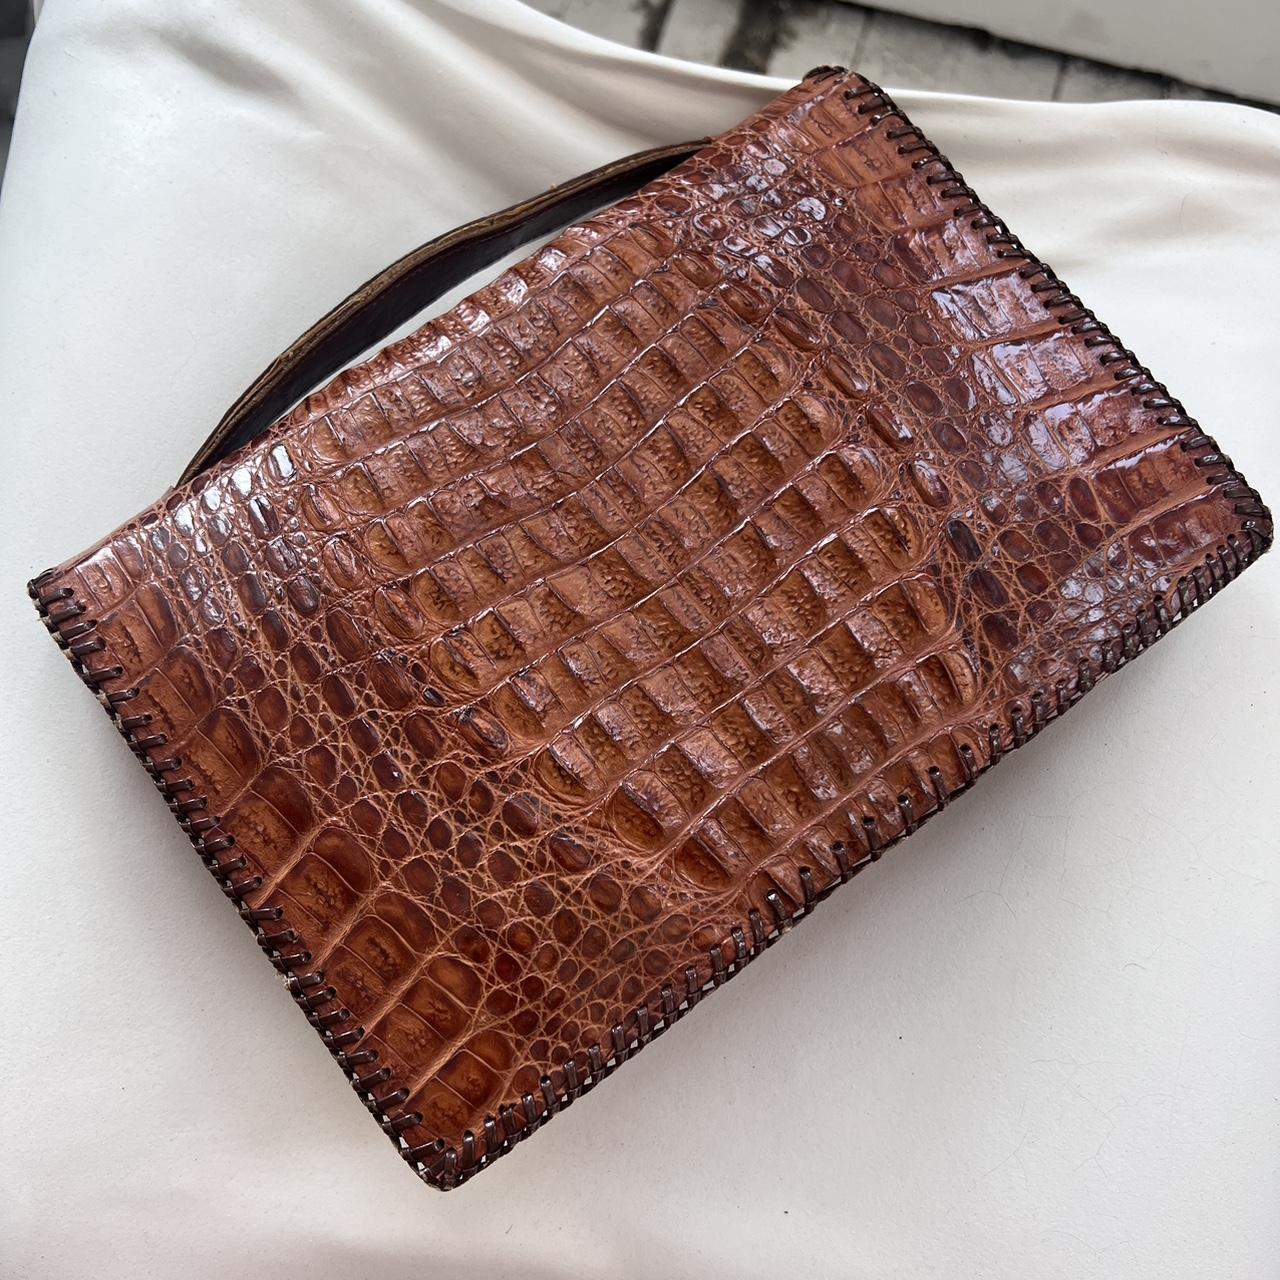 Vintage Alligator Handbag Clutch Purse With Top Handle Purse With 3  Compartments and Snap Closure - Etsy